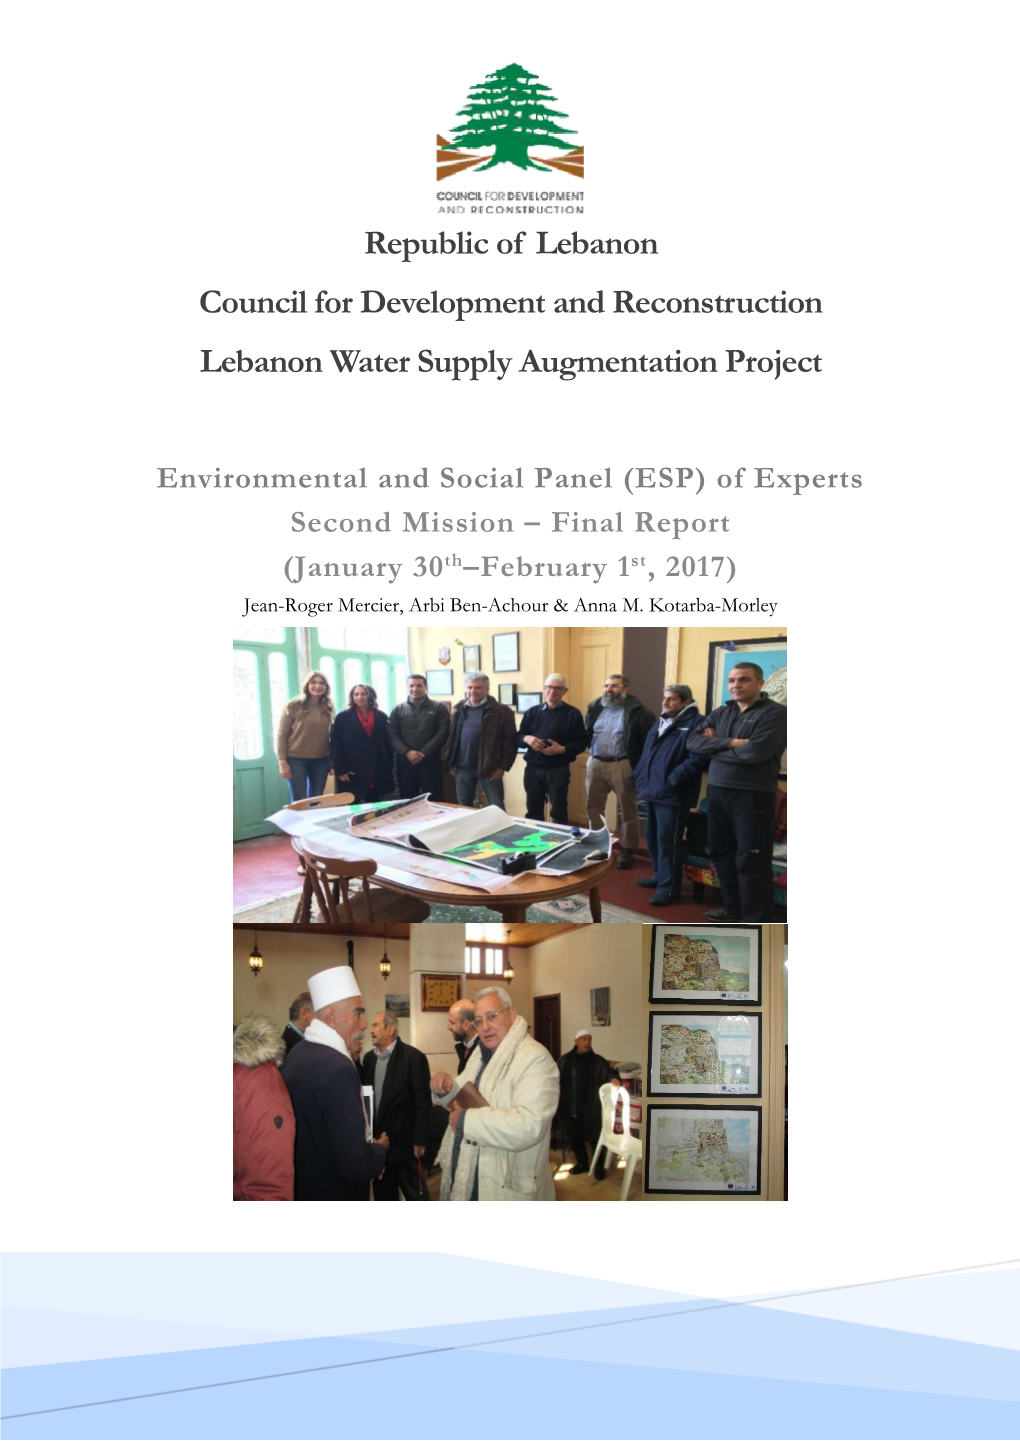 Republic of Lebanon Council for Development and Reconstruction Lebanon Water Supply Augmentation Project